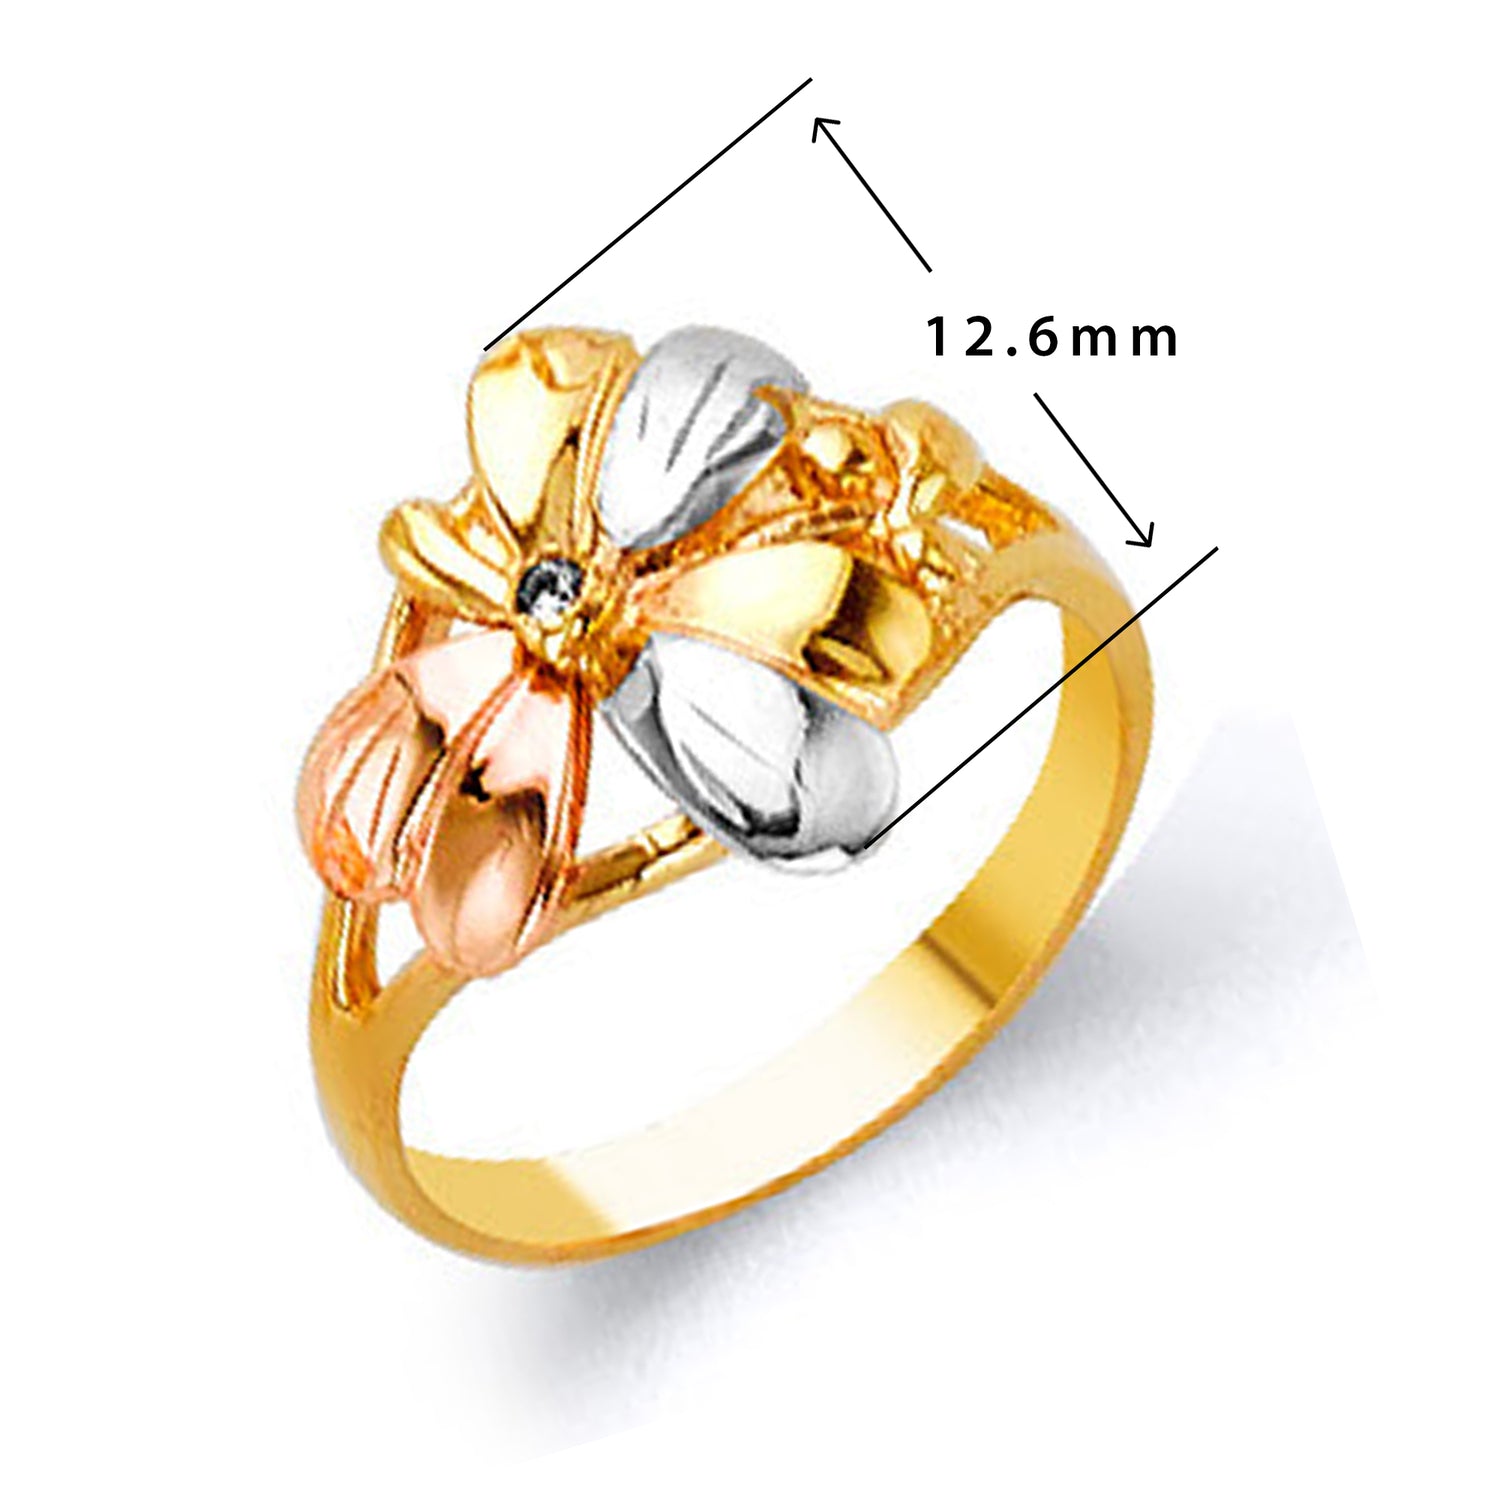 Floral Bow Knot Ring in Solid Gold with Measurement